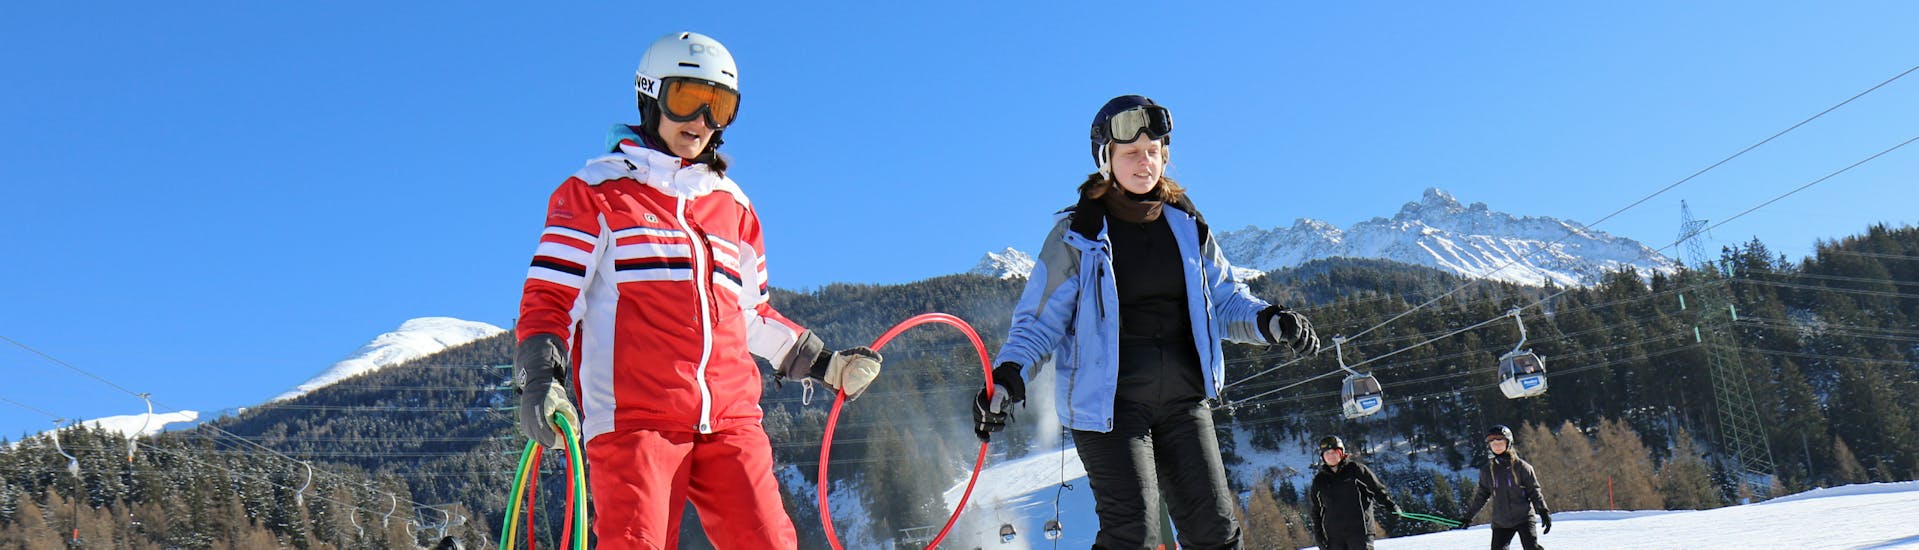 Private Ski Lessons for Adults in Samnaun&#x2F;Ischgl with Skischule Pfunds  - Hero image